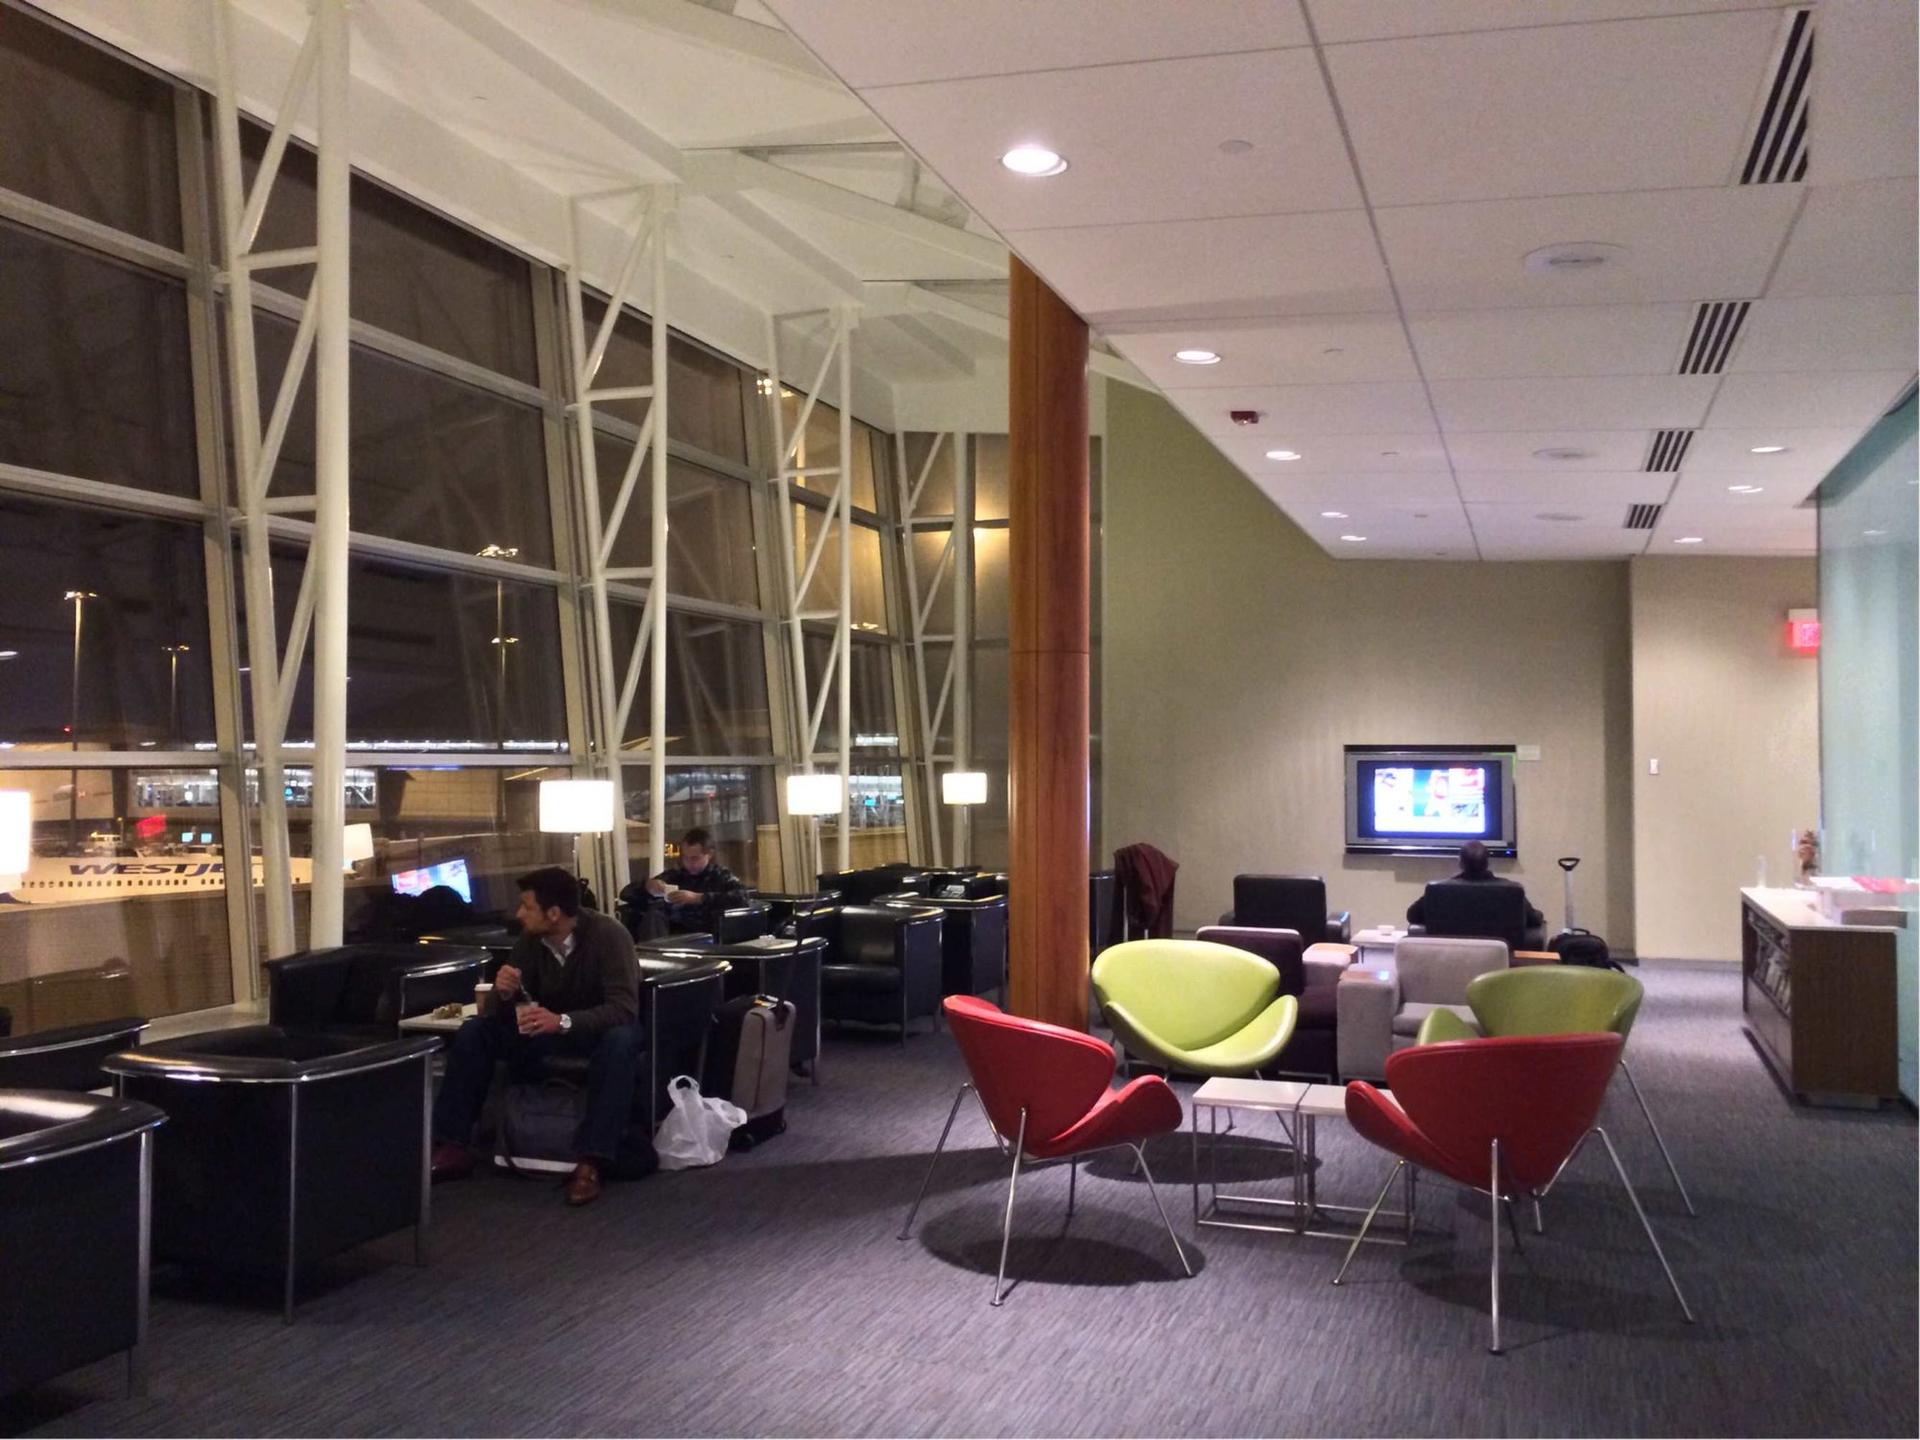 Air Canada Maple Leaf Lounge image 1 of 12